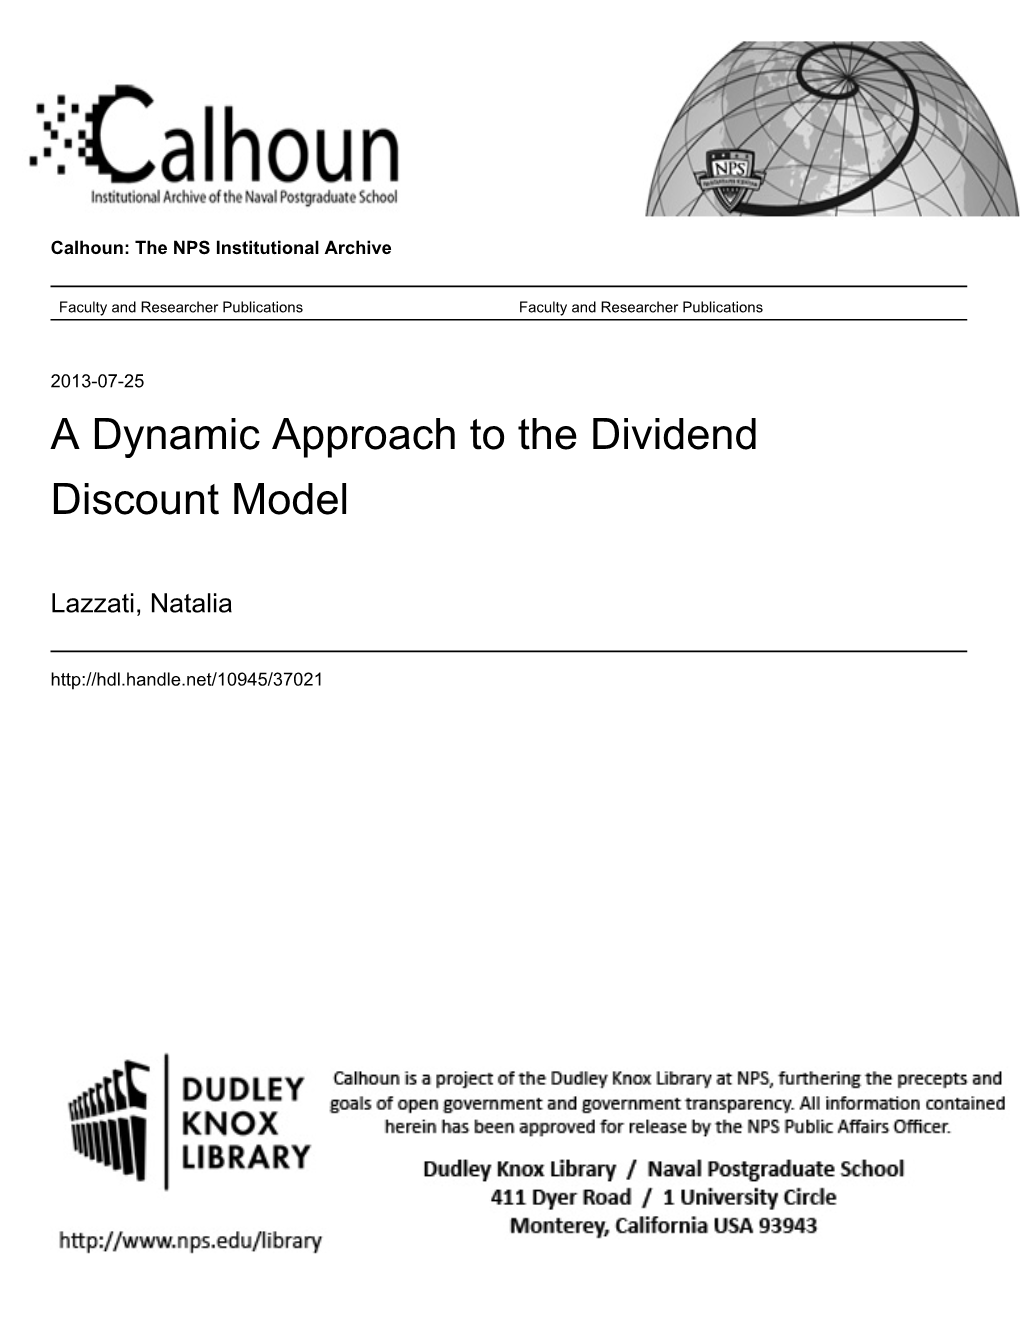 A Dynamic Approach to the Dividend Discount Model